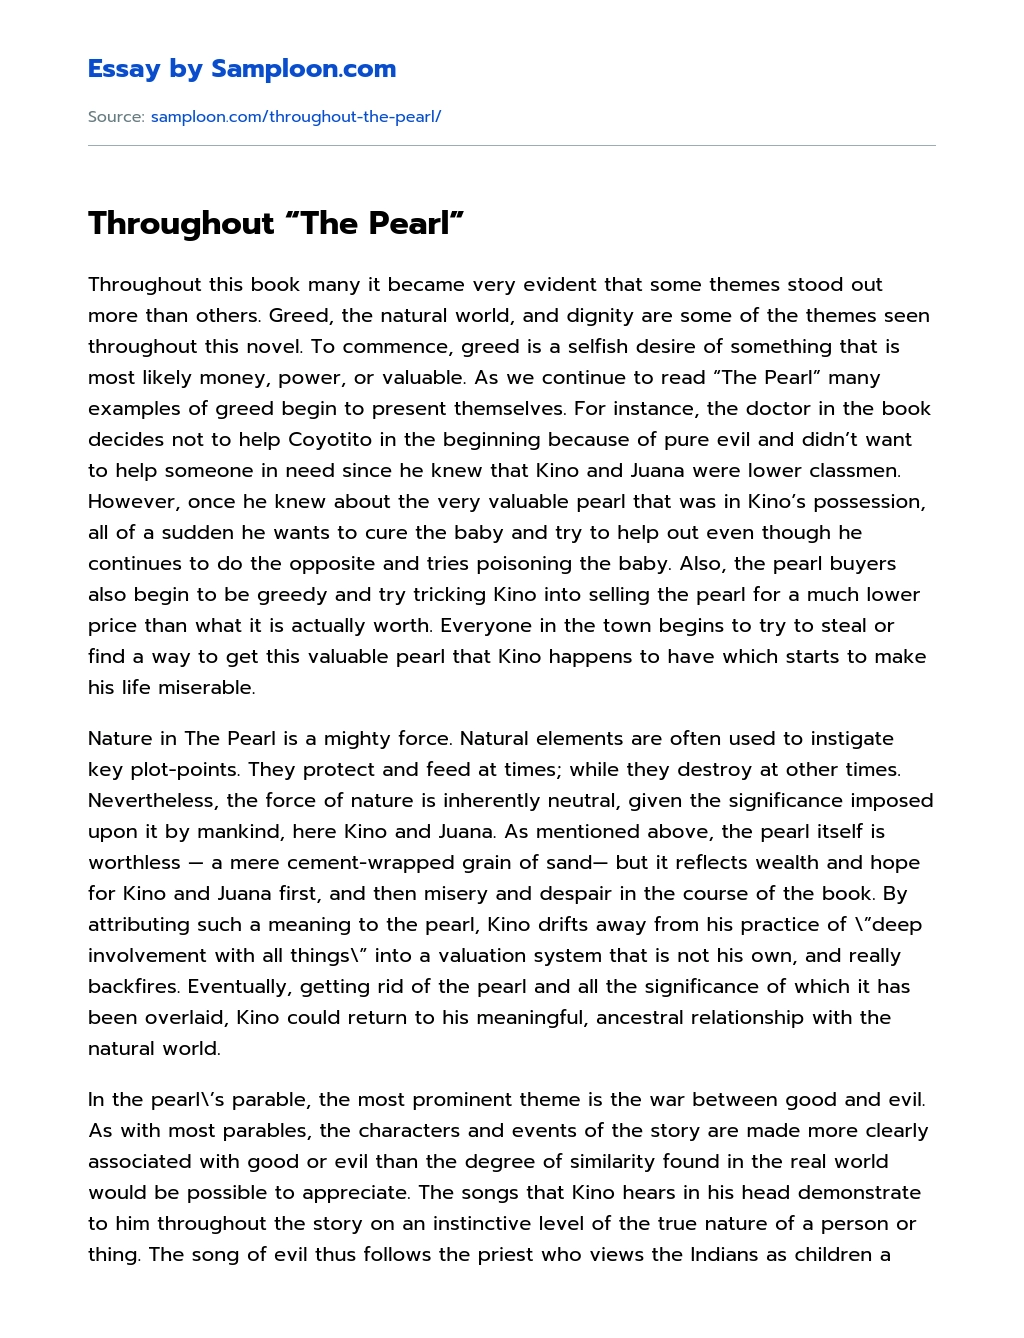 Throughout “The Pearl” Character Analysis essay